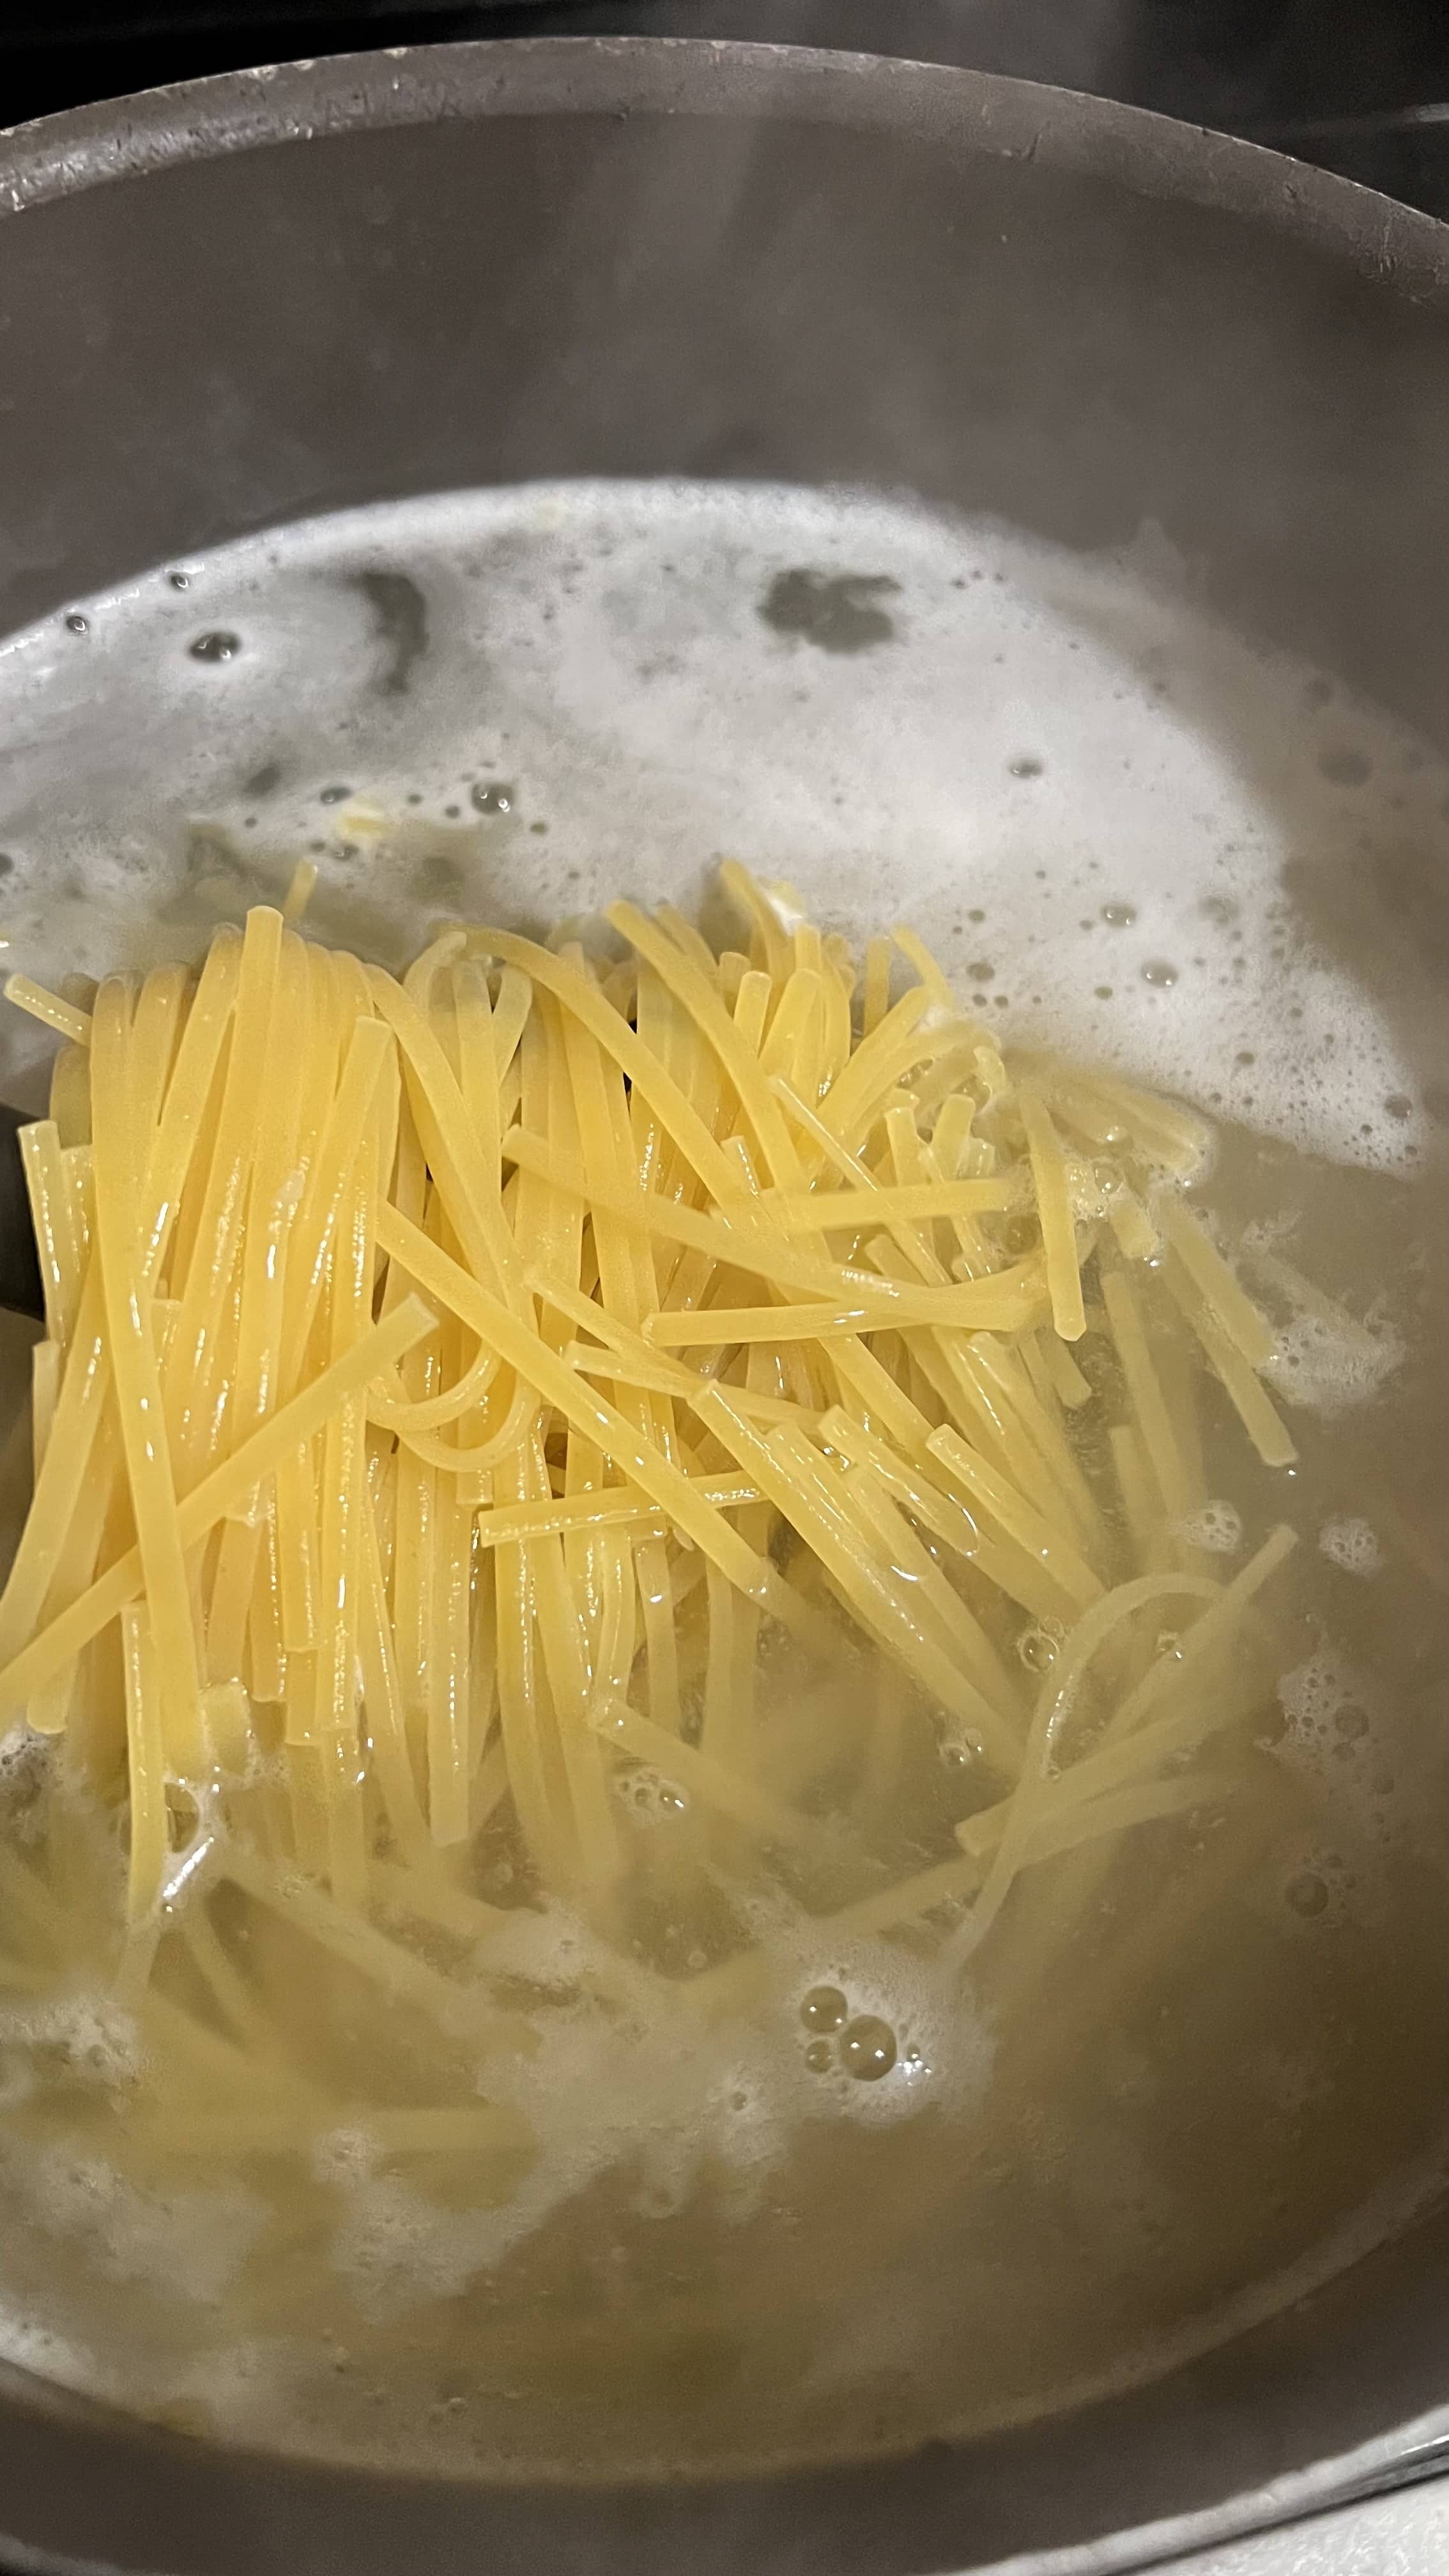 Linguini noodles in boiling water.